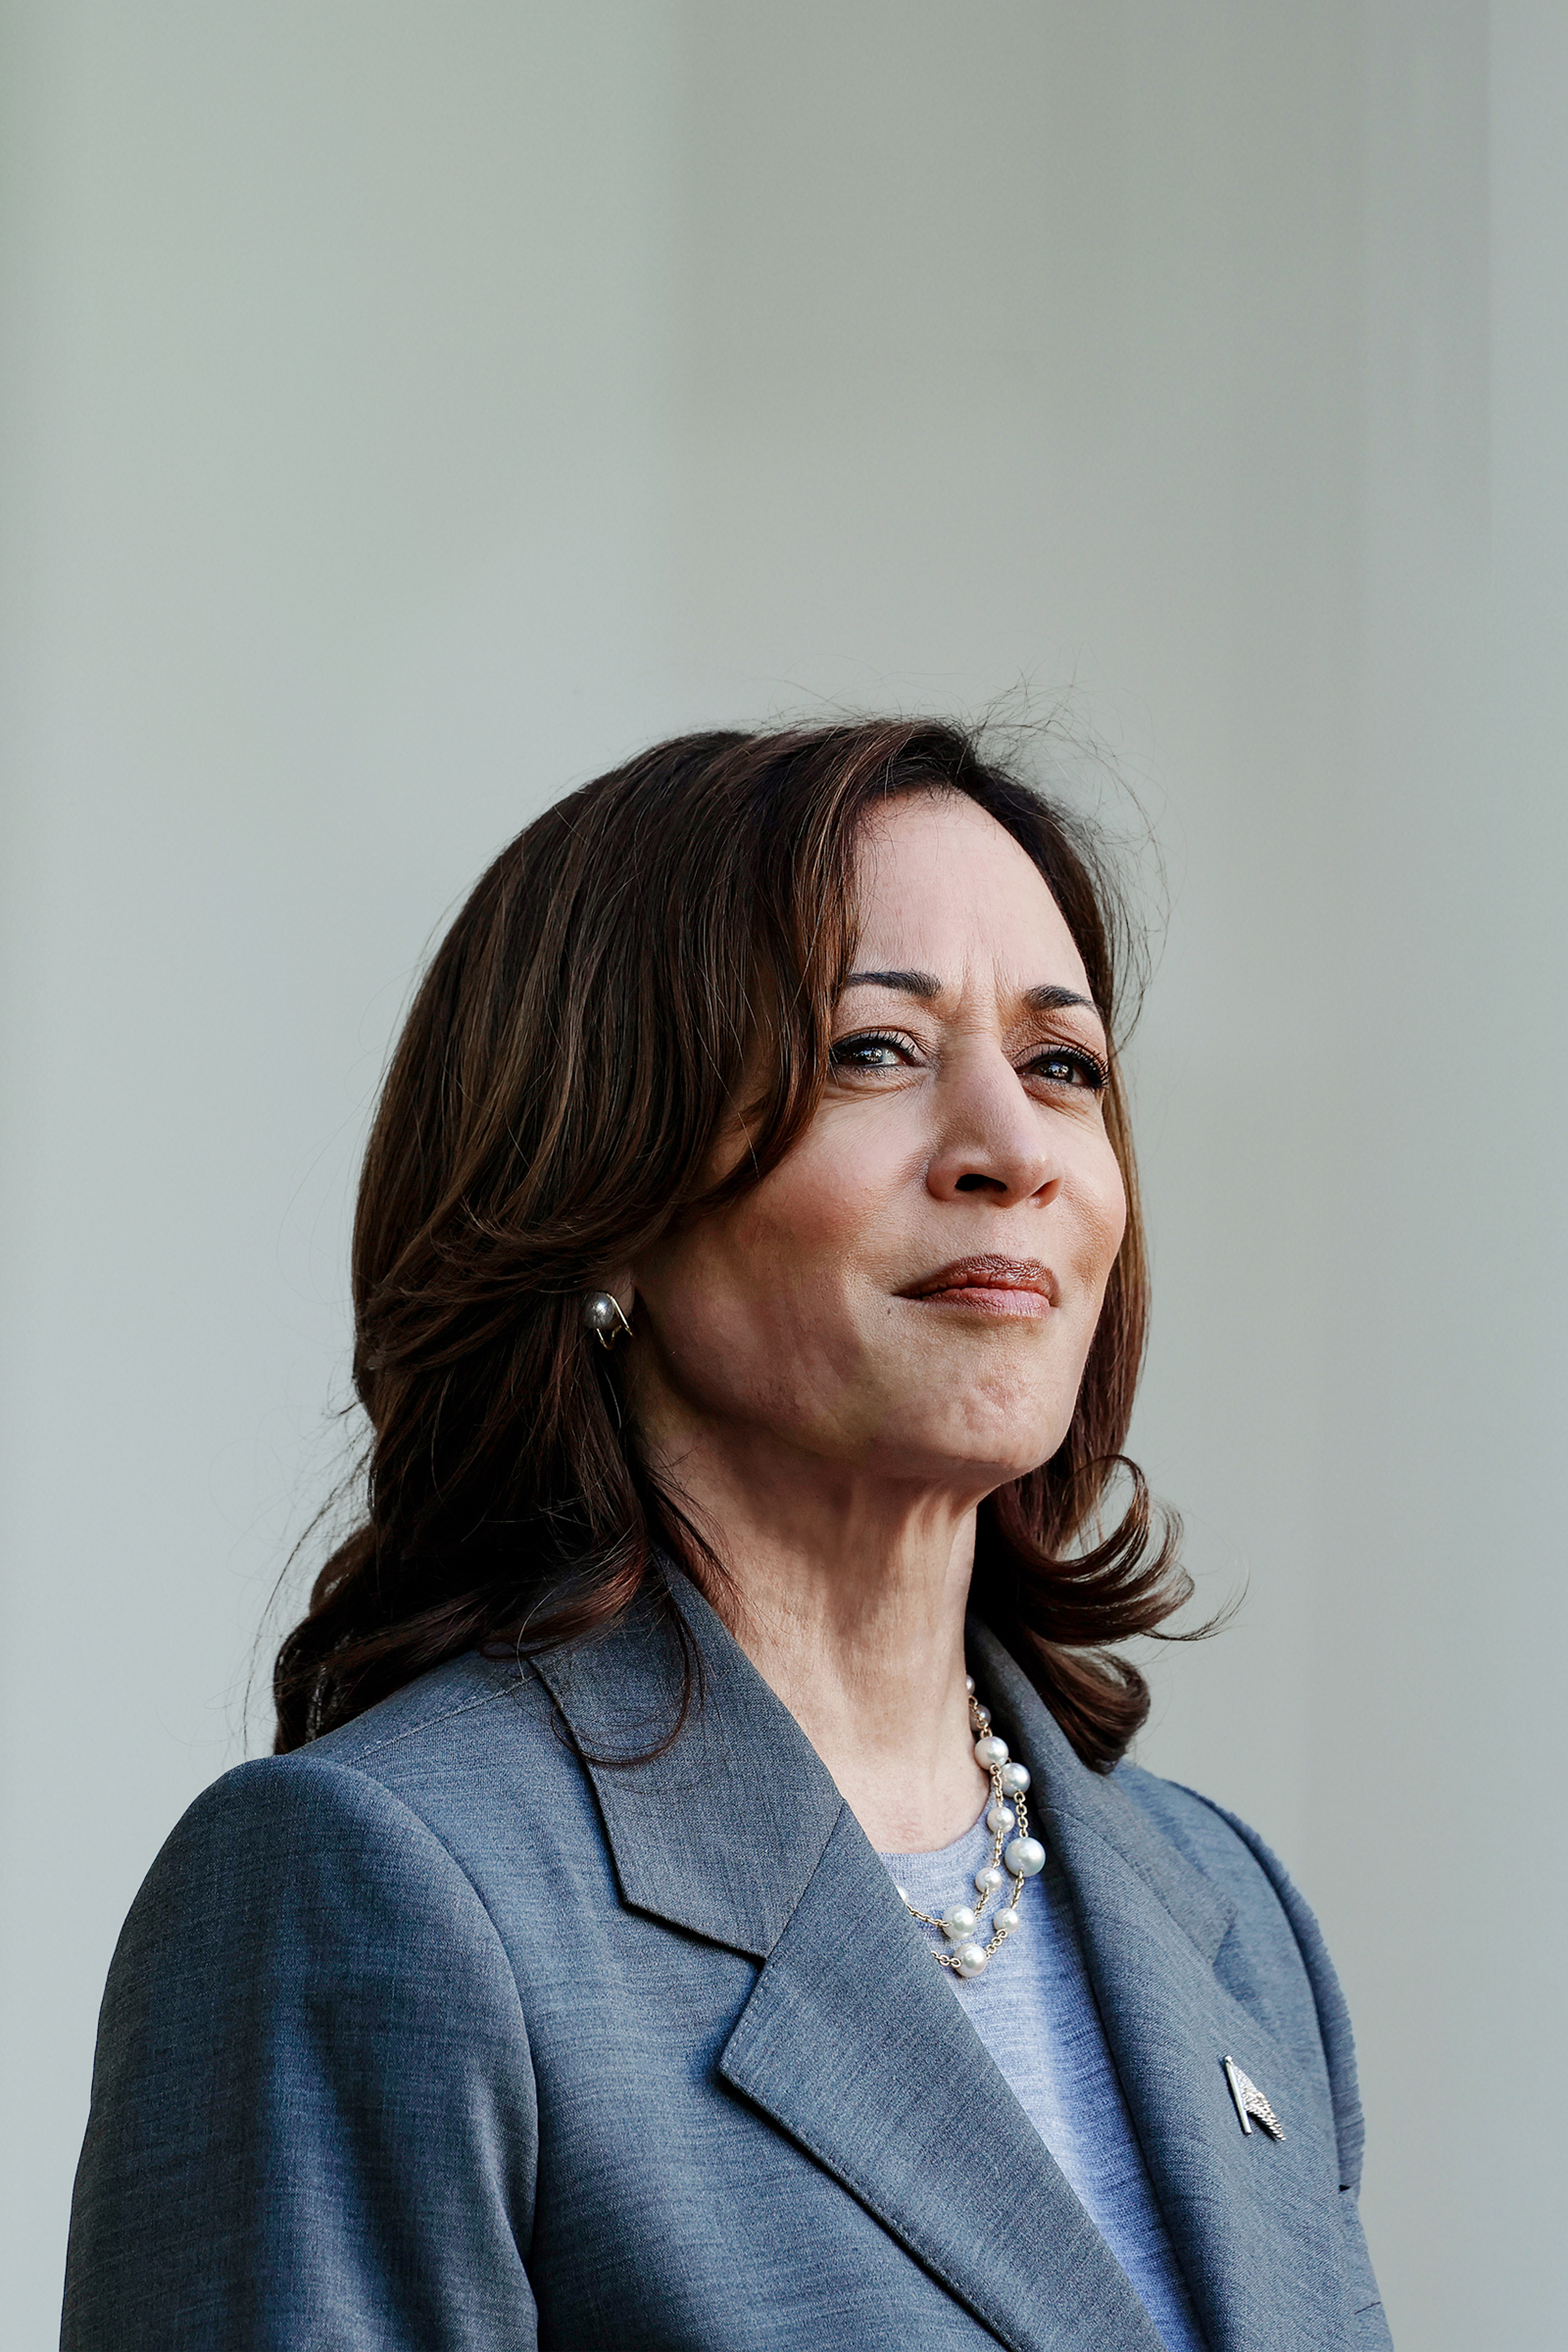 30 Things to Know About Kamala Harris, New Democrat Frontrunner